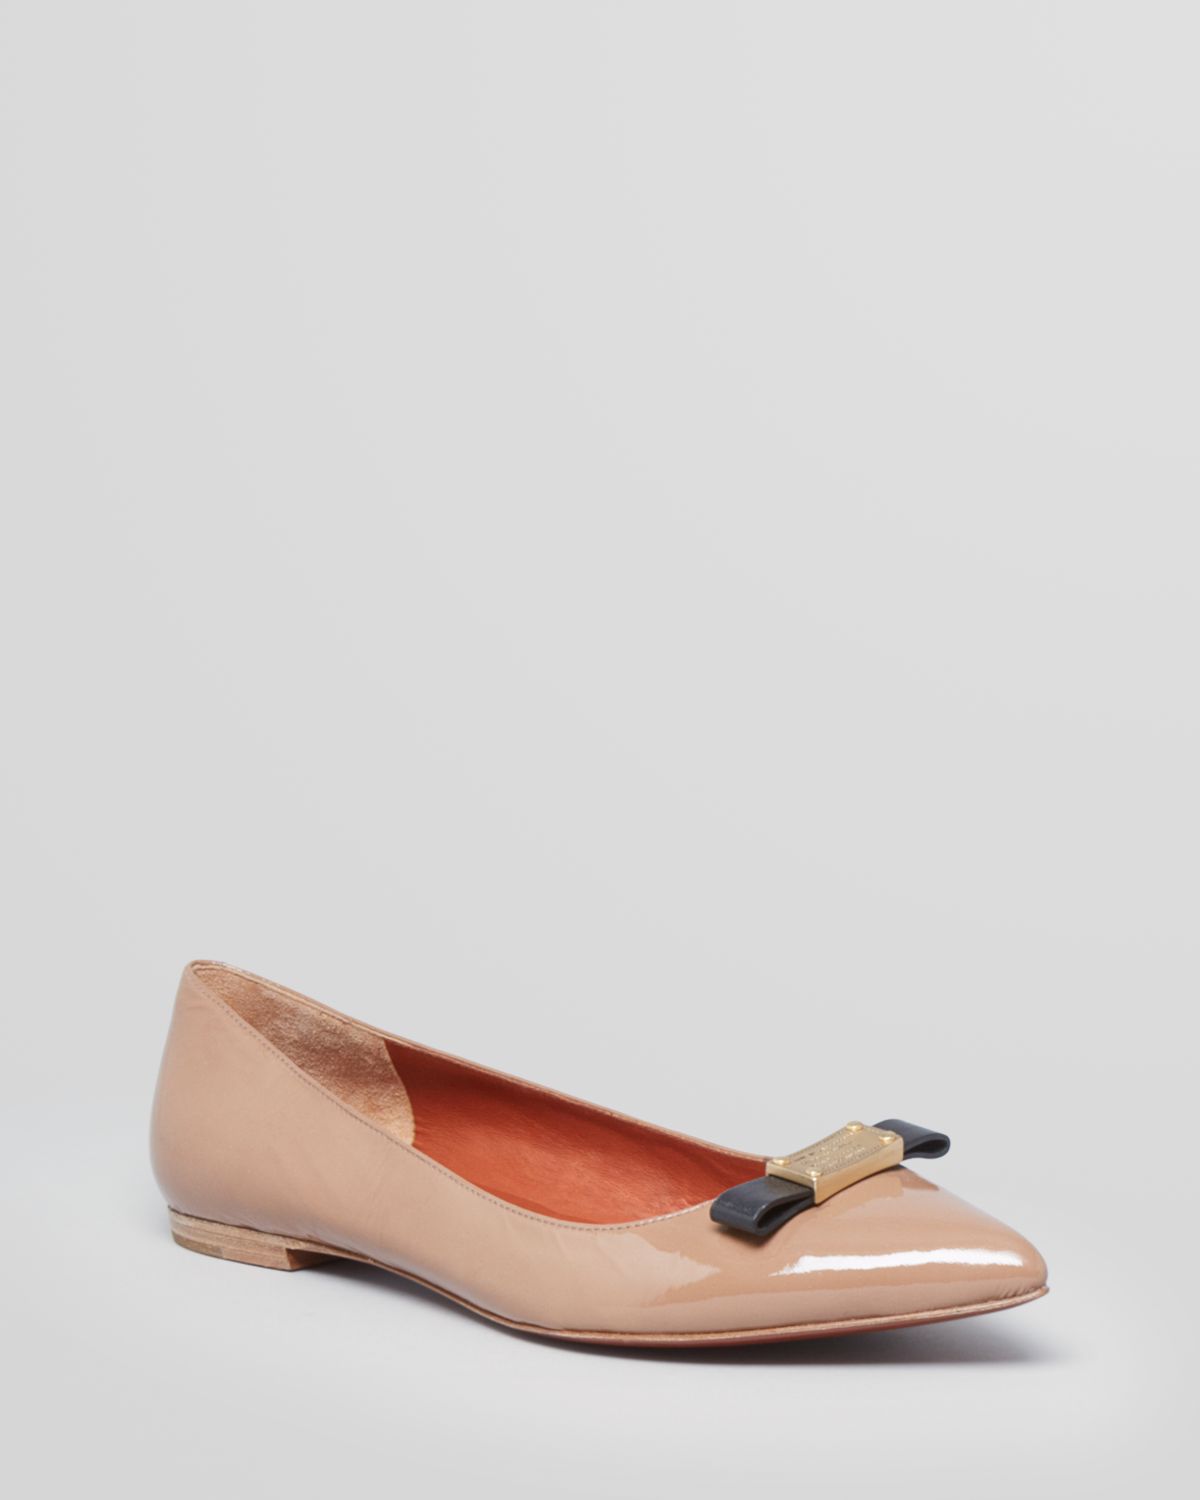 Lyst - Marc By Marc Jacobs Pointed Toe Flats Bow in Natural